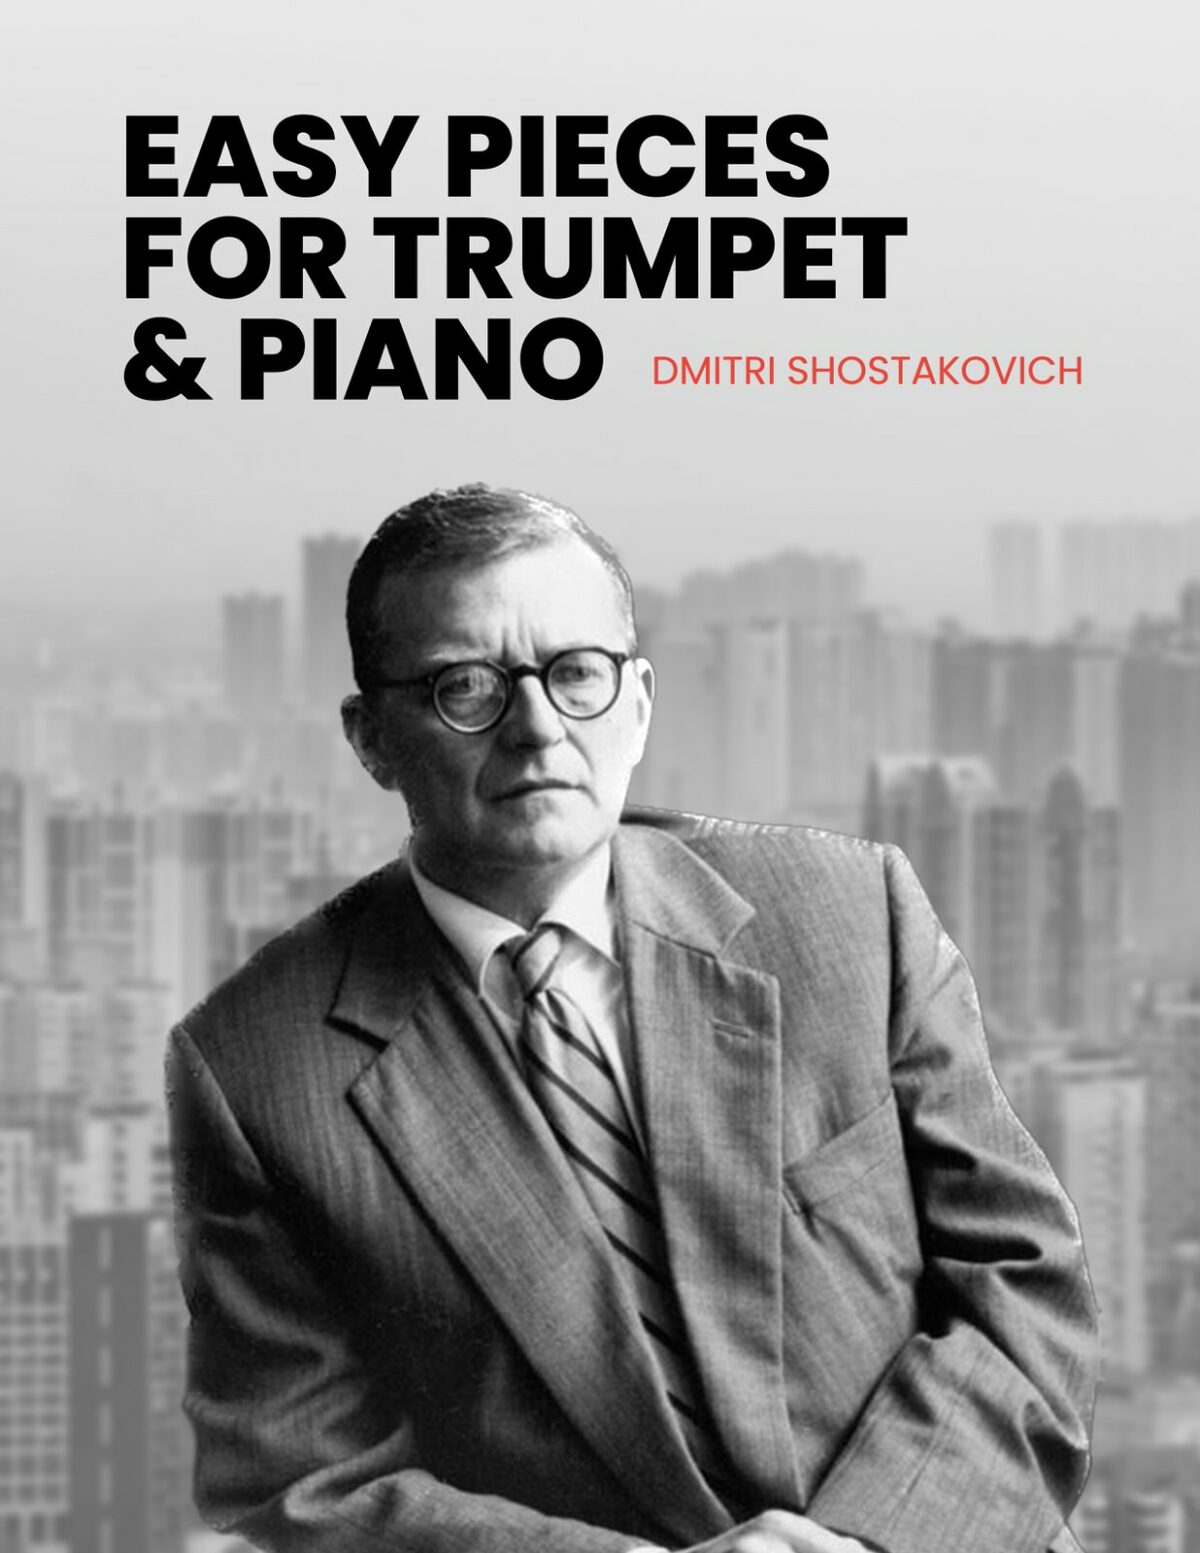 Shostakovich's Easy Pieces for Trumpet and Piano